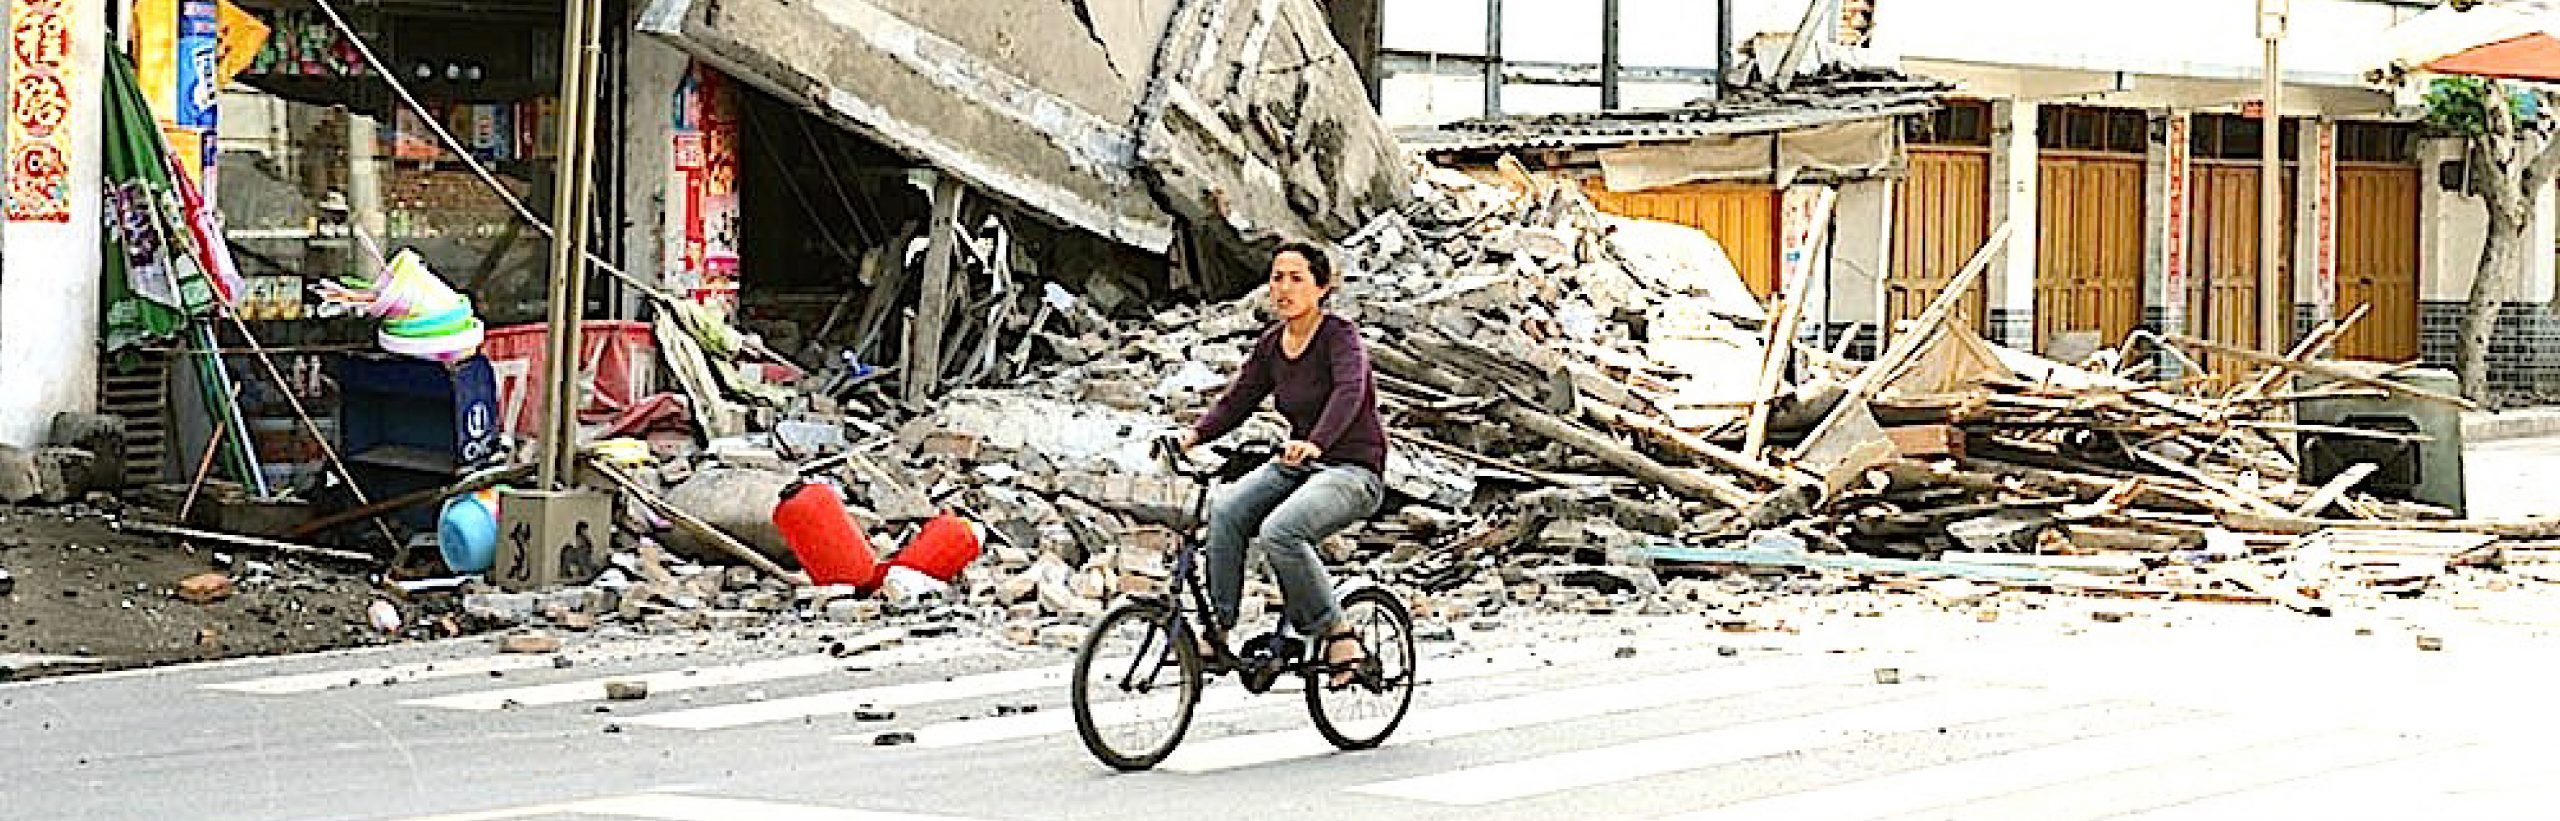 Woman riding a bike through the debris of a collapsed building